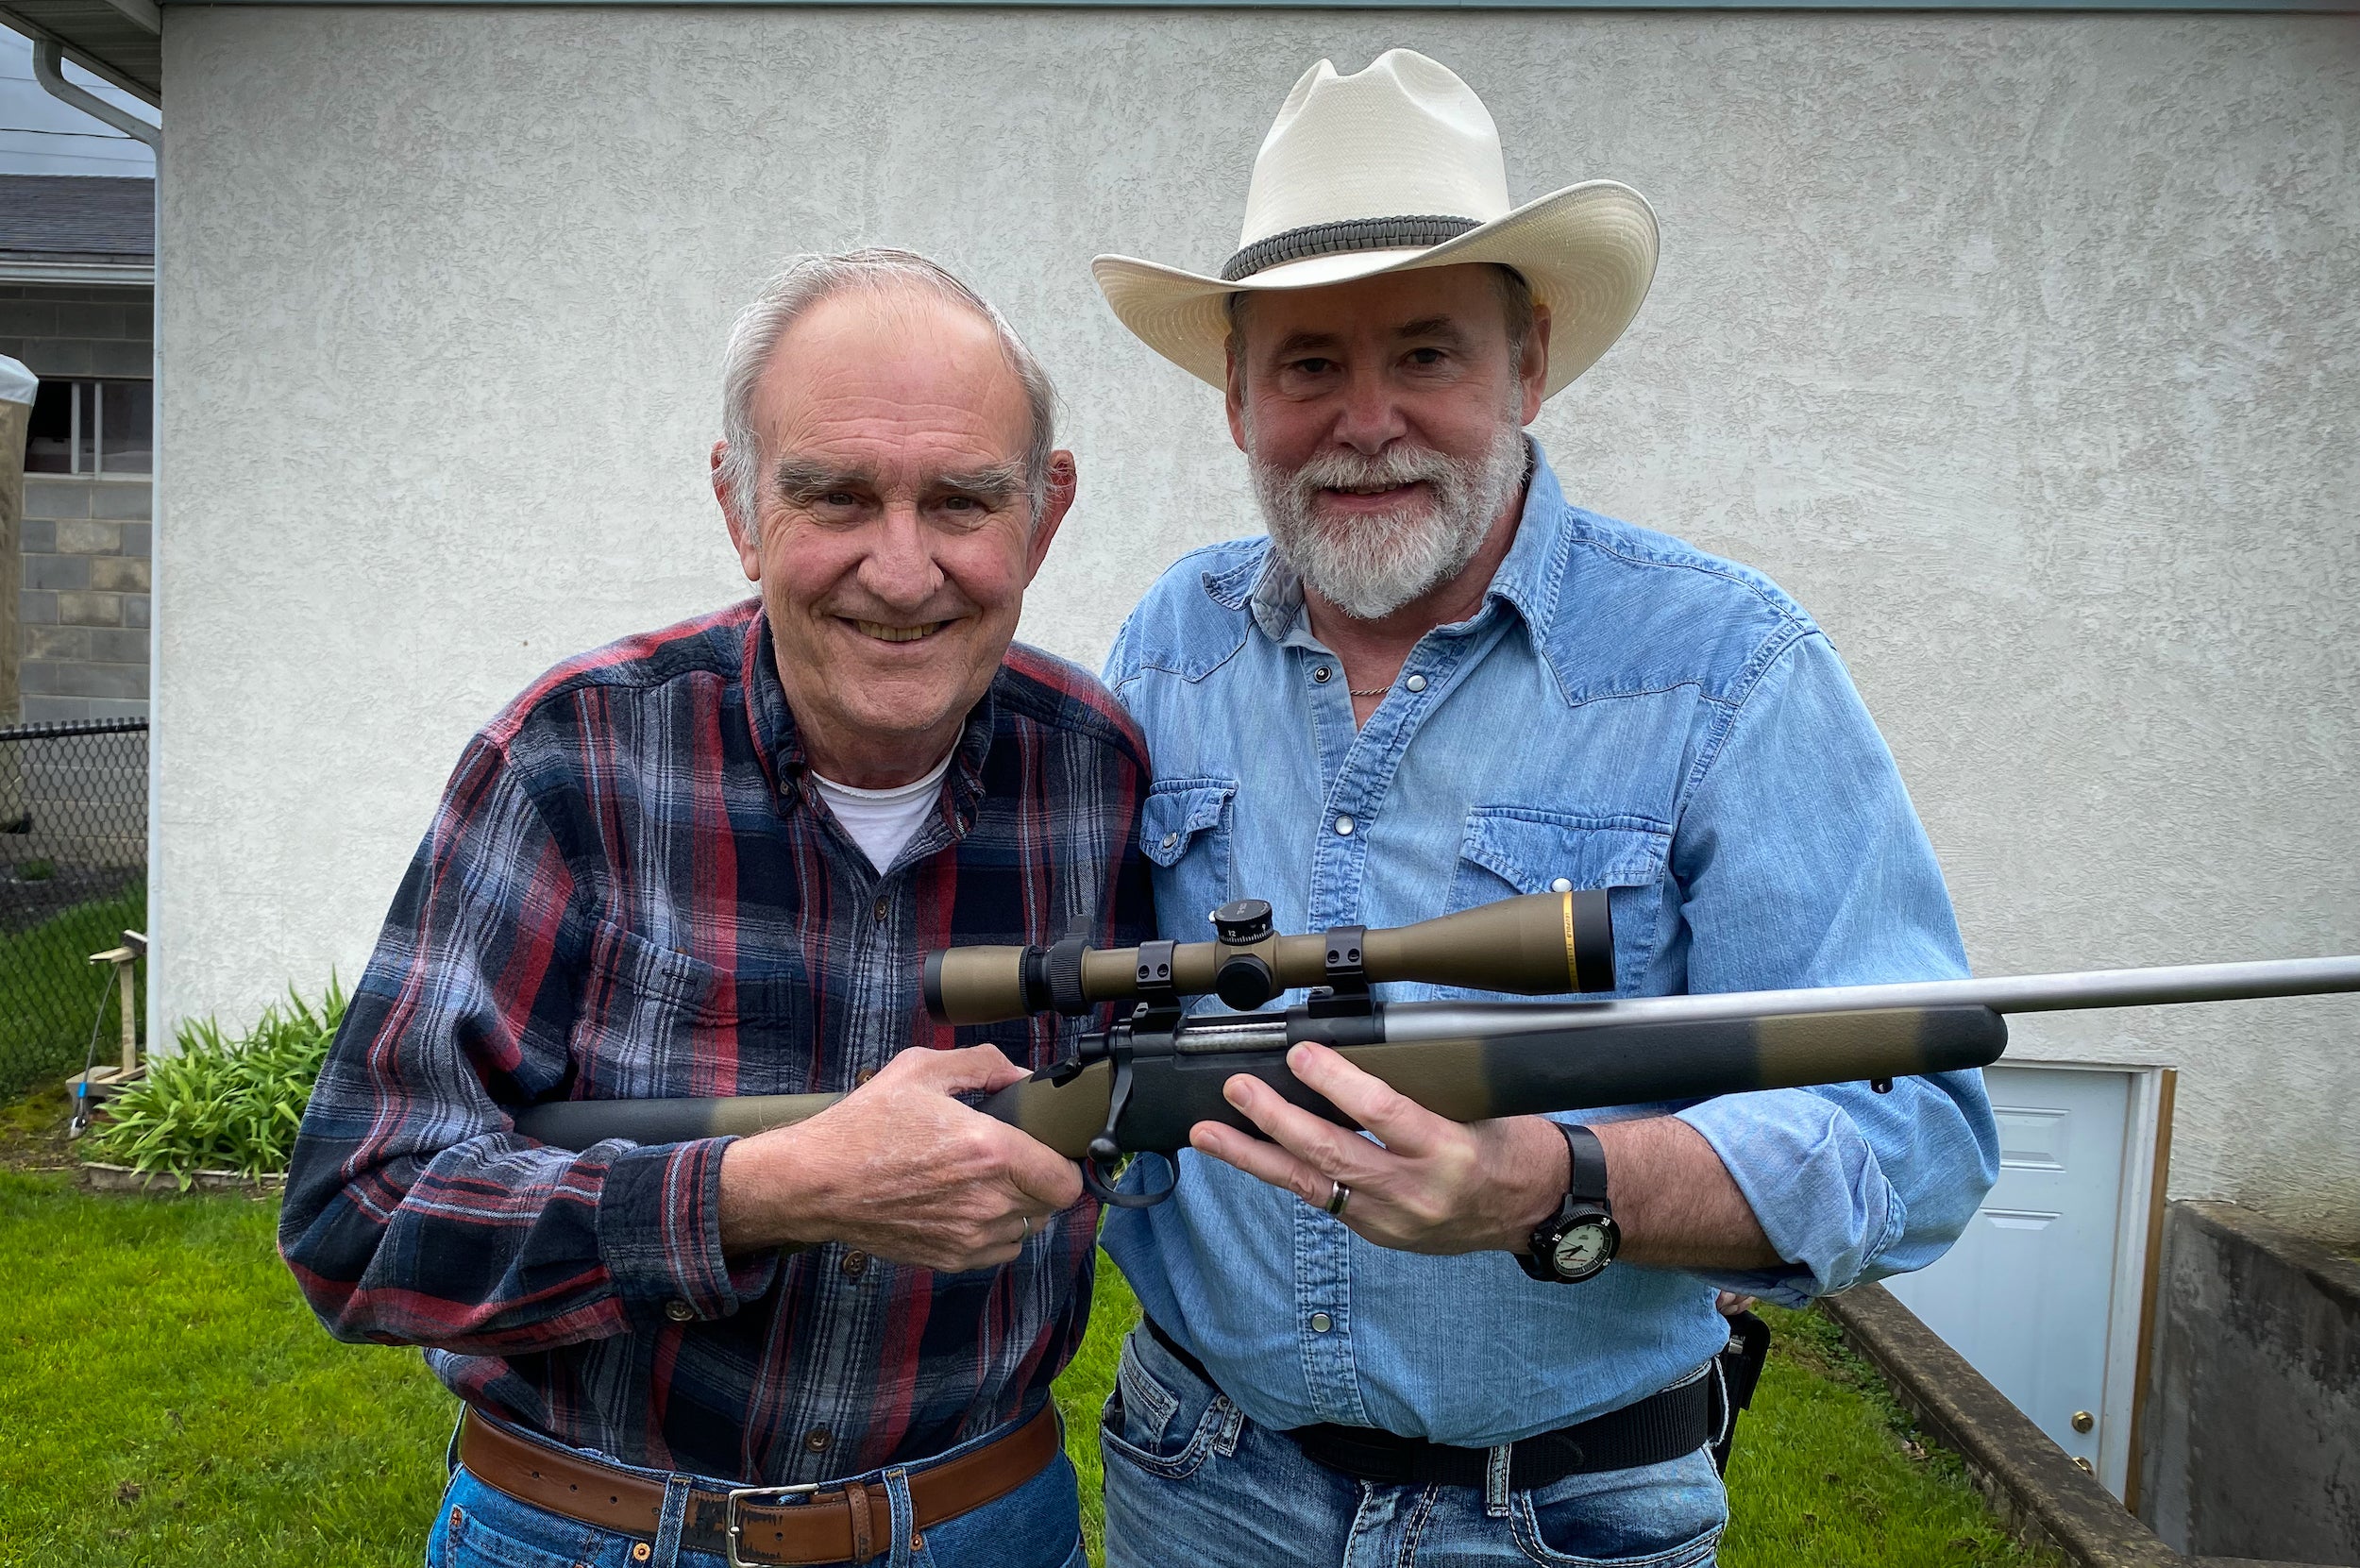 Richard Mann and Melvin Forbes standing next to each other holding a rifle.